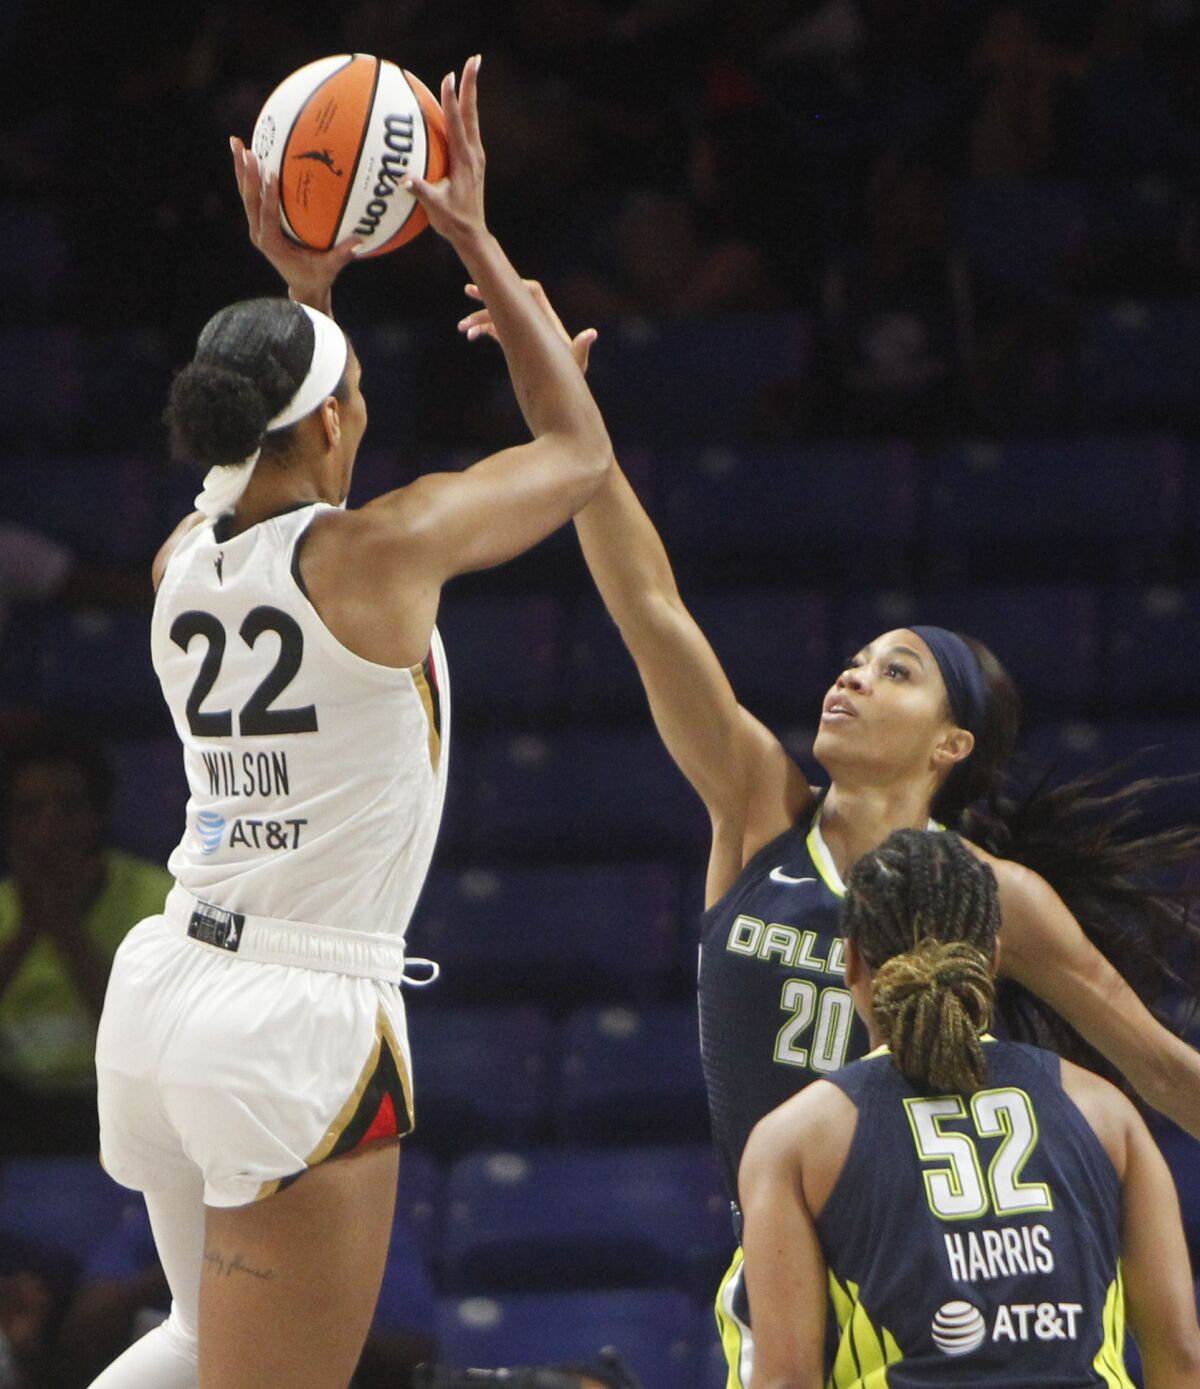 Dallas Wings forward Isabelle Harrison (20) defends against a jump shot by Las Vegas Aces forward A'ja Wilson (22) during first half of a WNBA basketball game at UT-Arlington's College Park Center in Arlington, Texas, Wednesday, June 15, 2022. (Steve Hamm/The Dallas Morning News via AP)